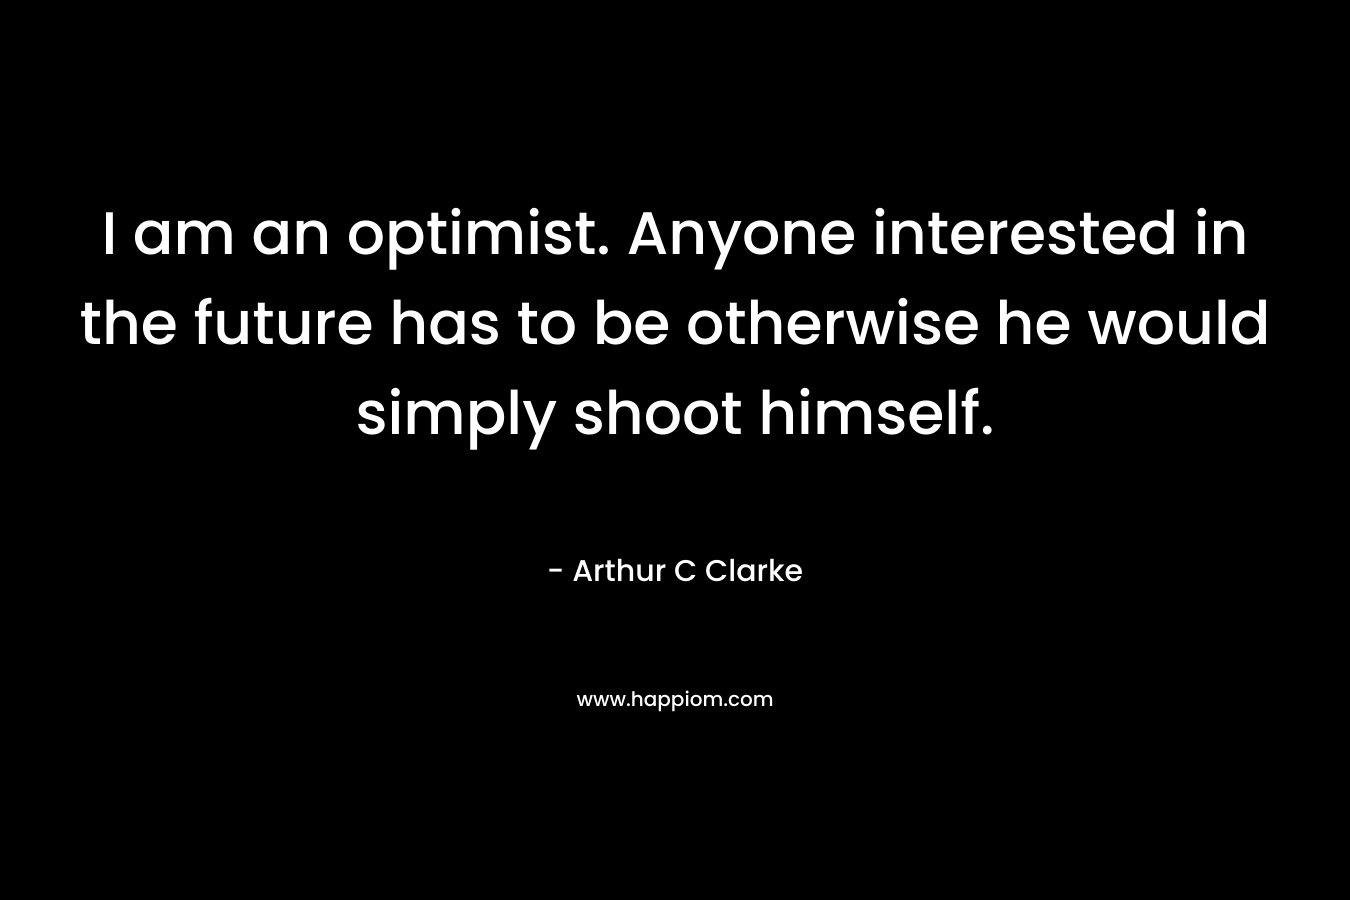 I am an optimist. Anyone interested in the future has to be otherwise he would simply shoot himself. – Arthur C Clarke